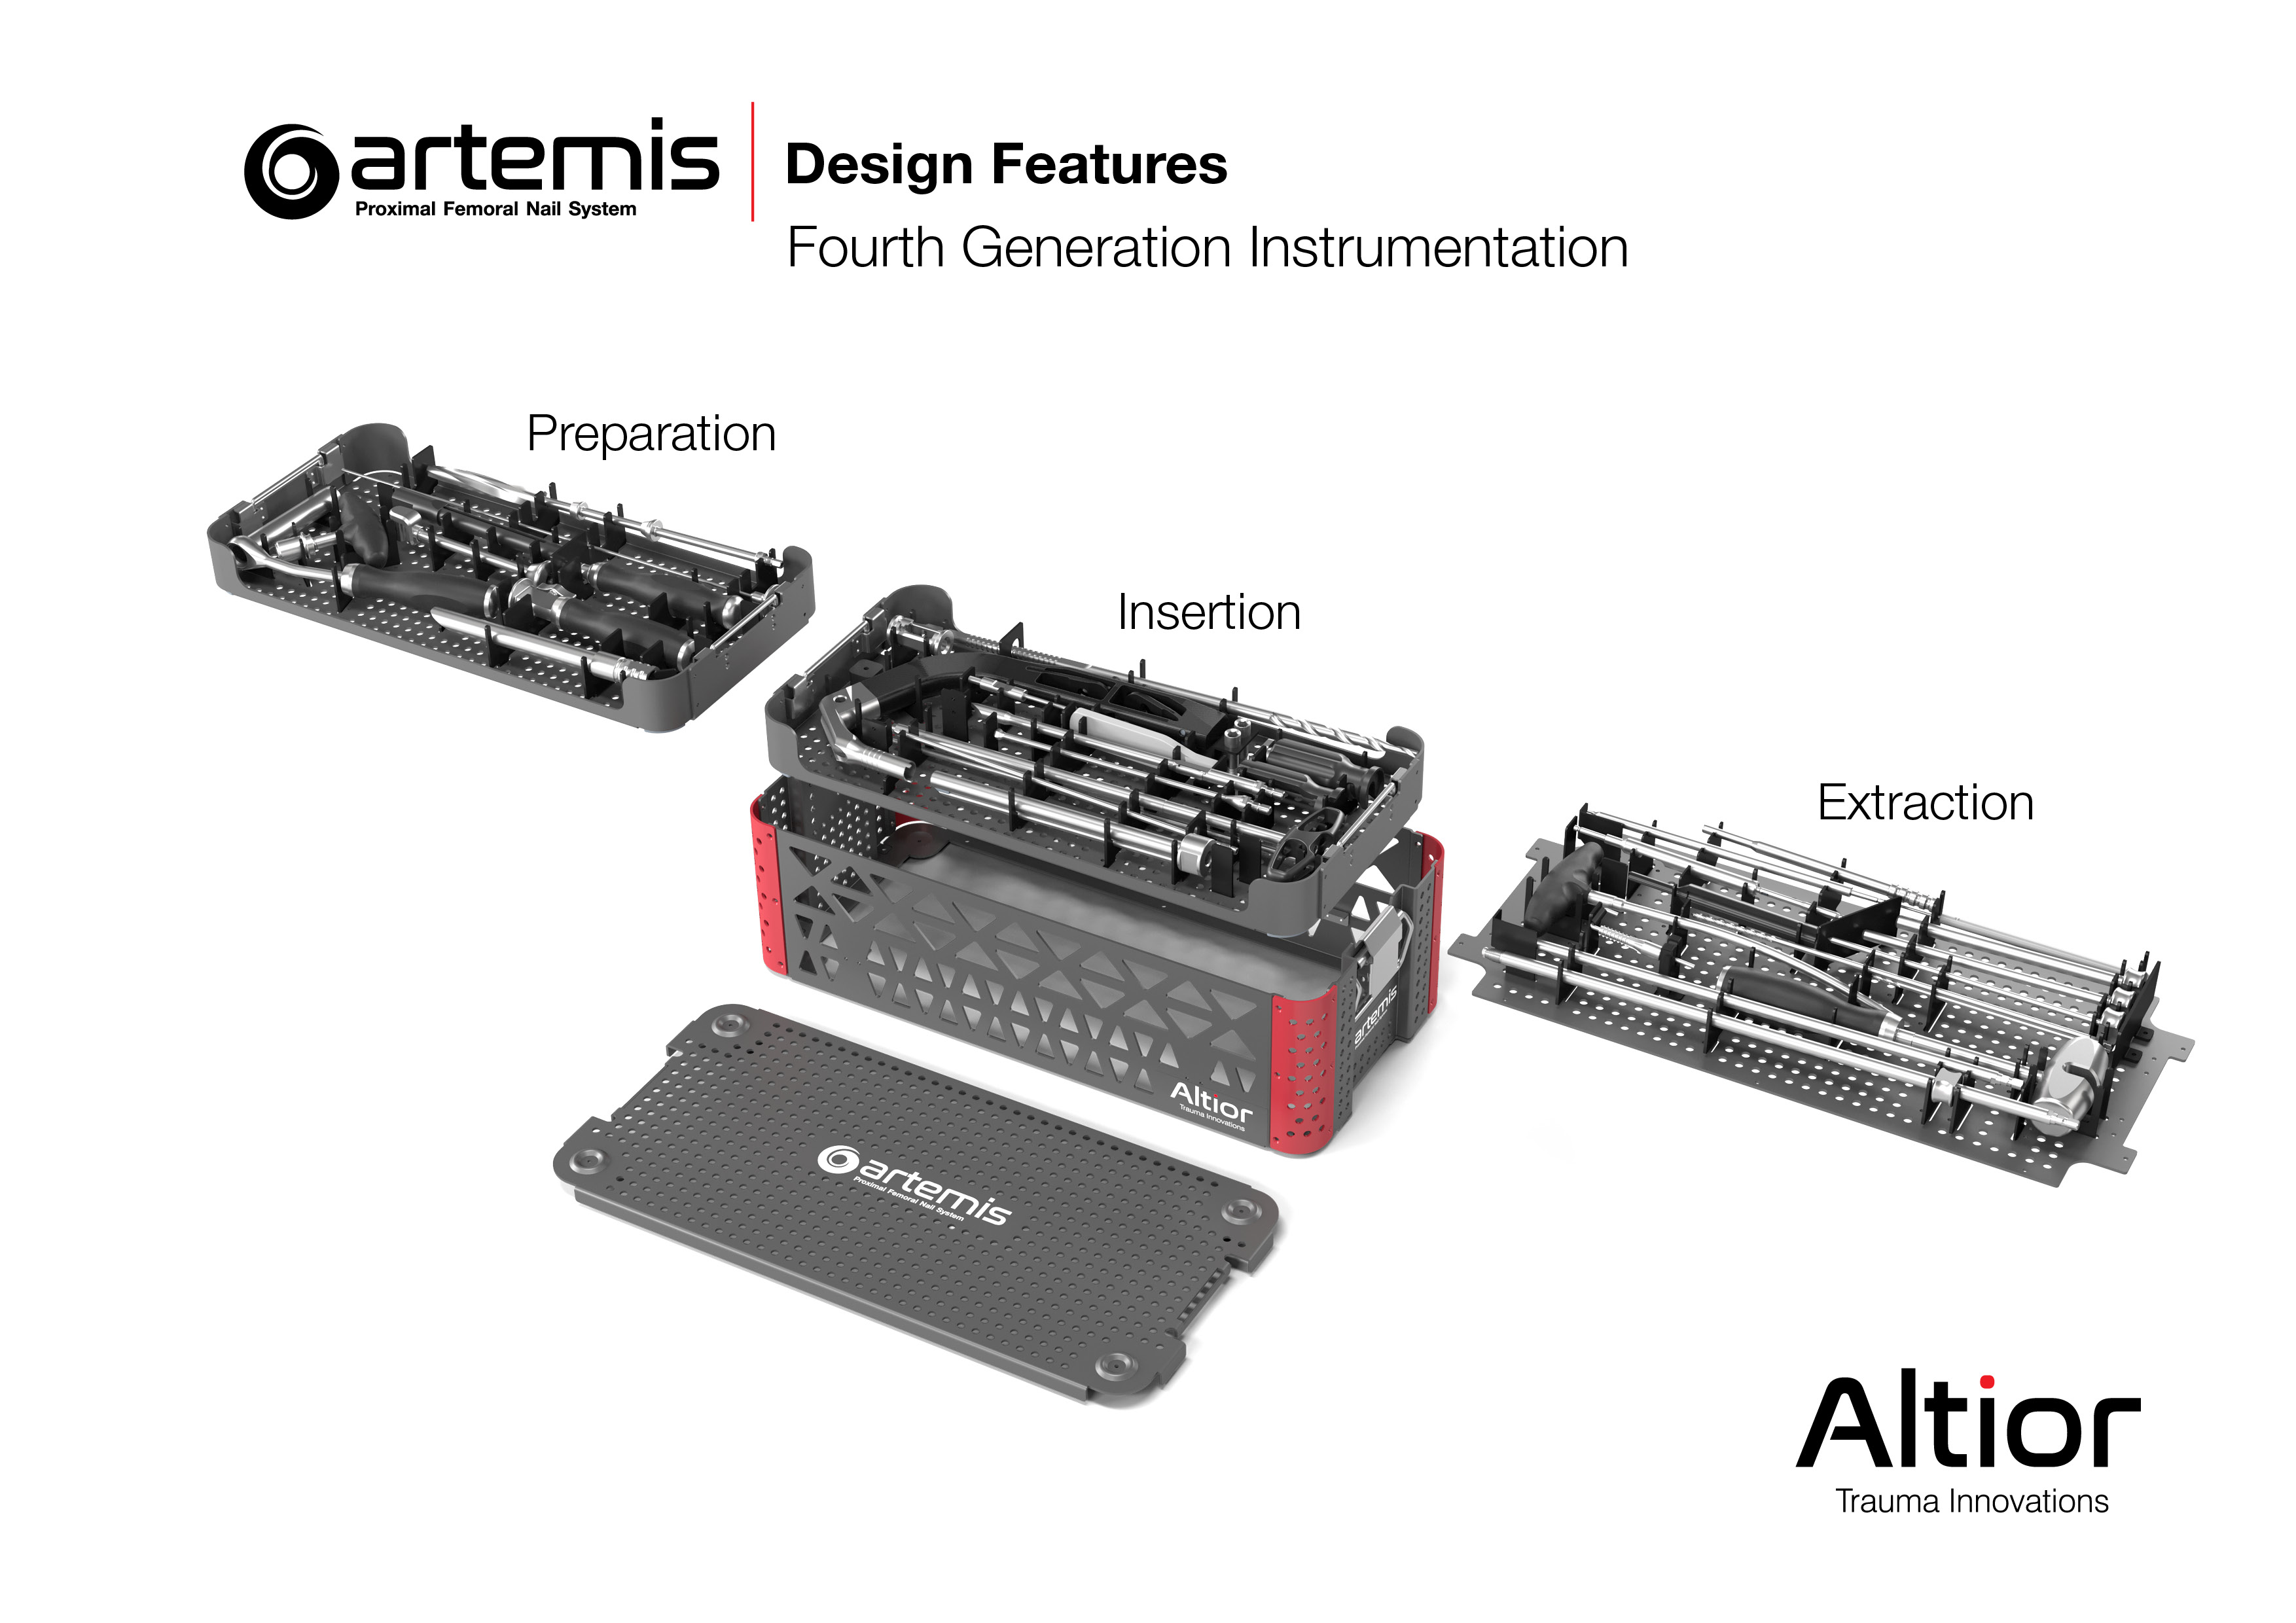 The Artemis System provides a fourth-generation nail with streamlined surgical instruments that allow for simplified implantation and superior patient benefits.  Among other unique design features, the instrument set includes a novel anti-rotation pin tha